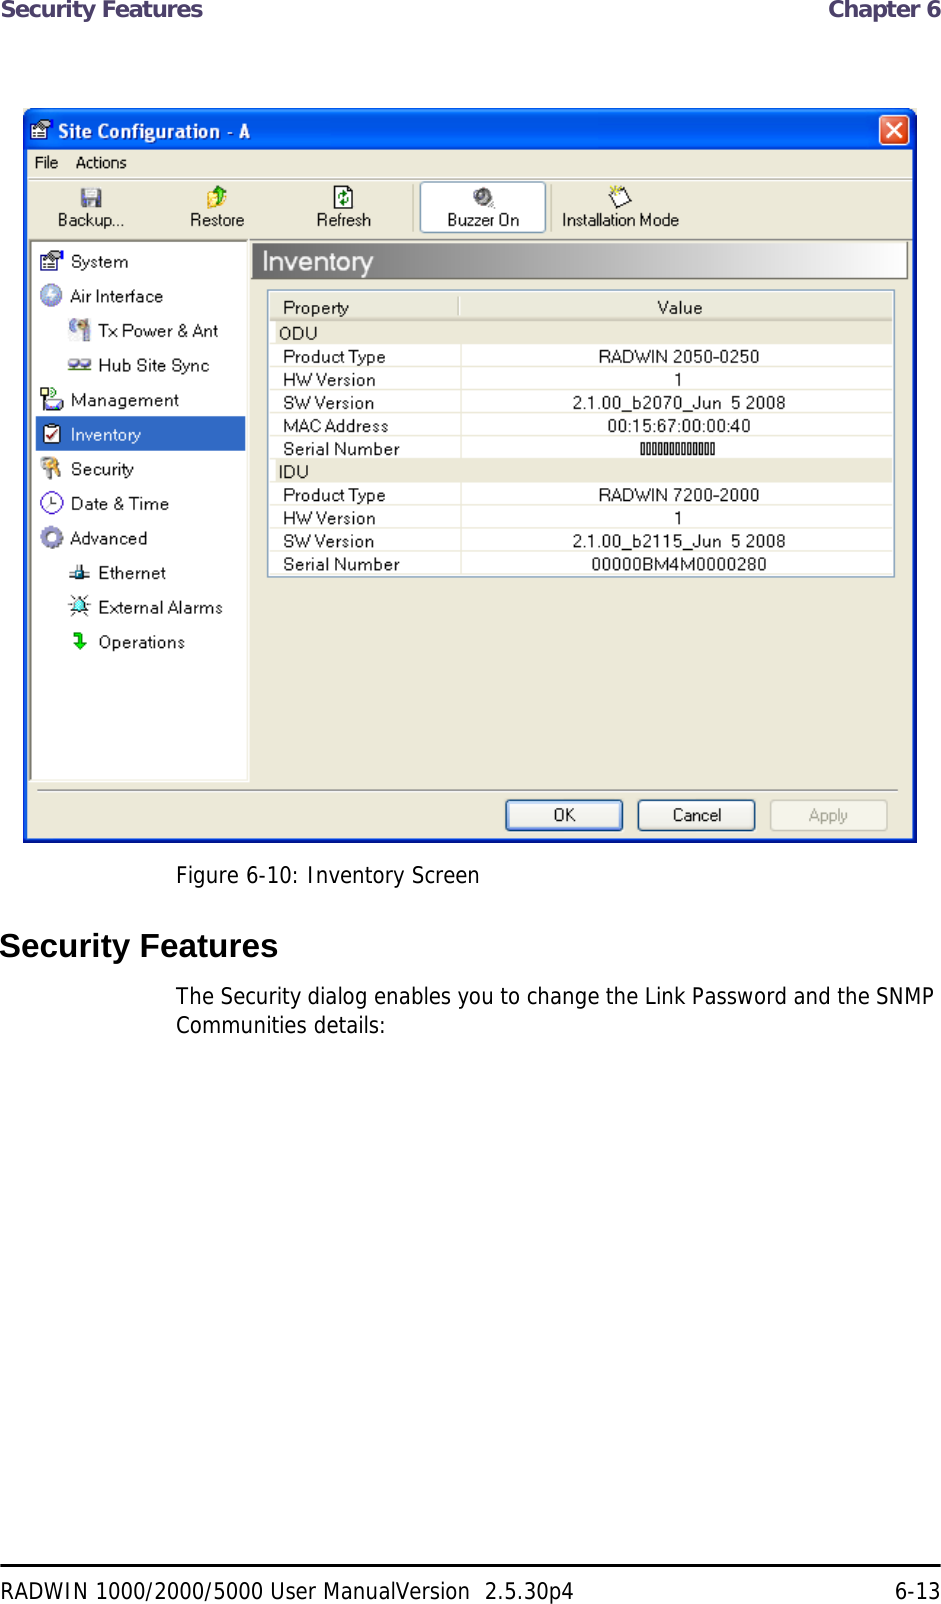 Security Features  Chapter 6RADWIN 1000/2000/5000 User ManualVersion  2.5.30p4 6-13Figure 6-10: Inventory ScreenSecurity FeaturesThe Security dialog enables you to change the Link Password and the SNMP Communities details: